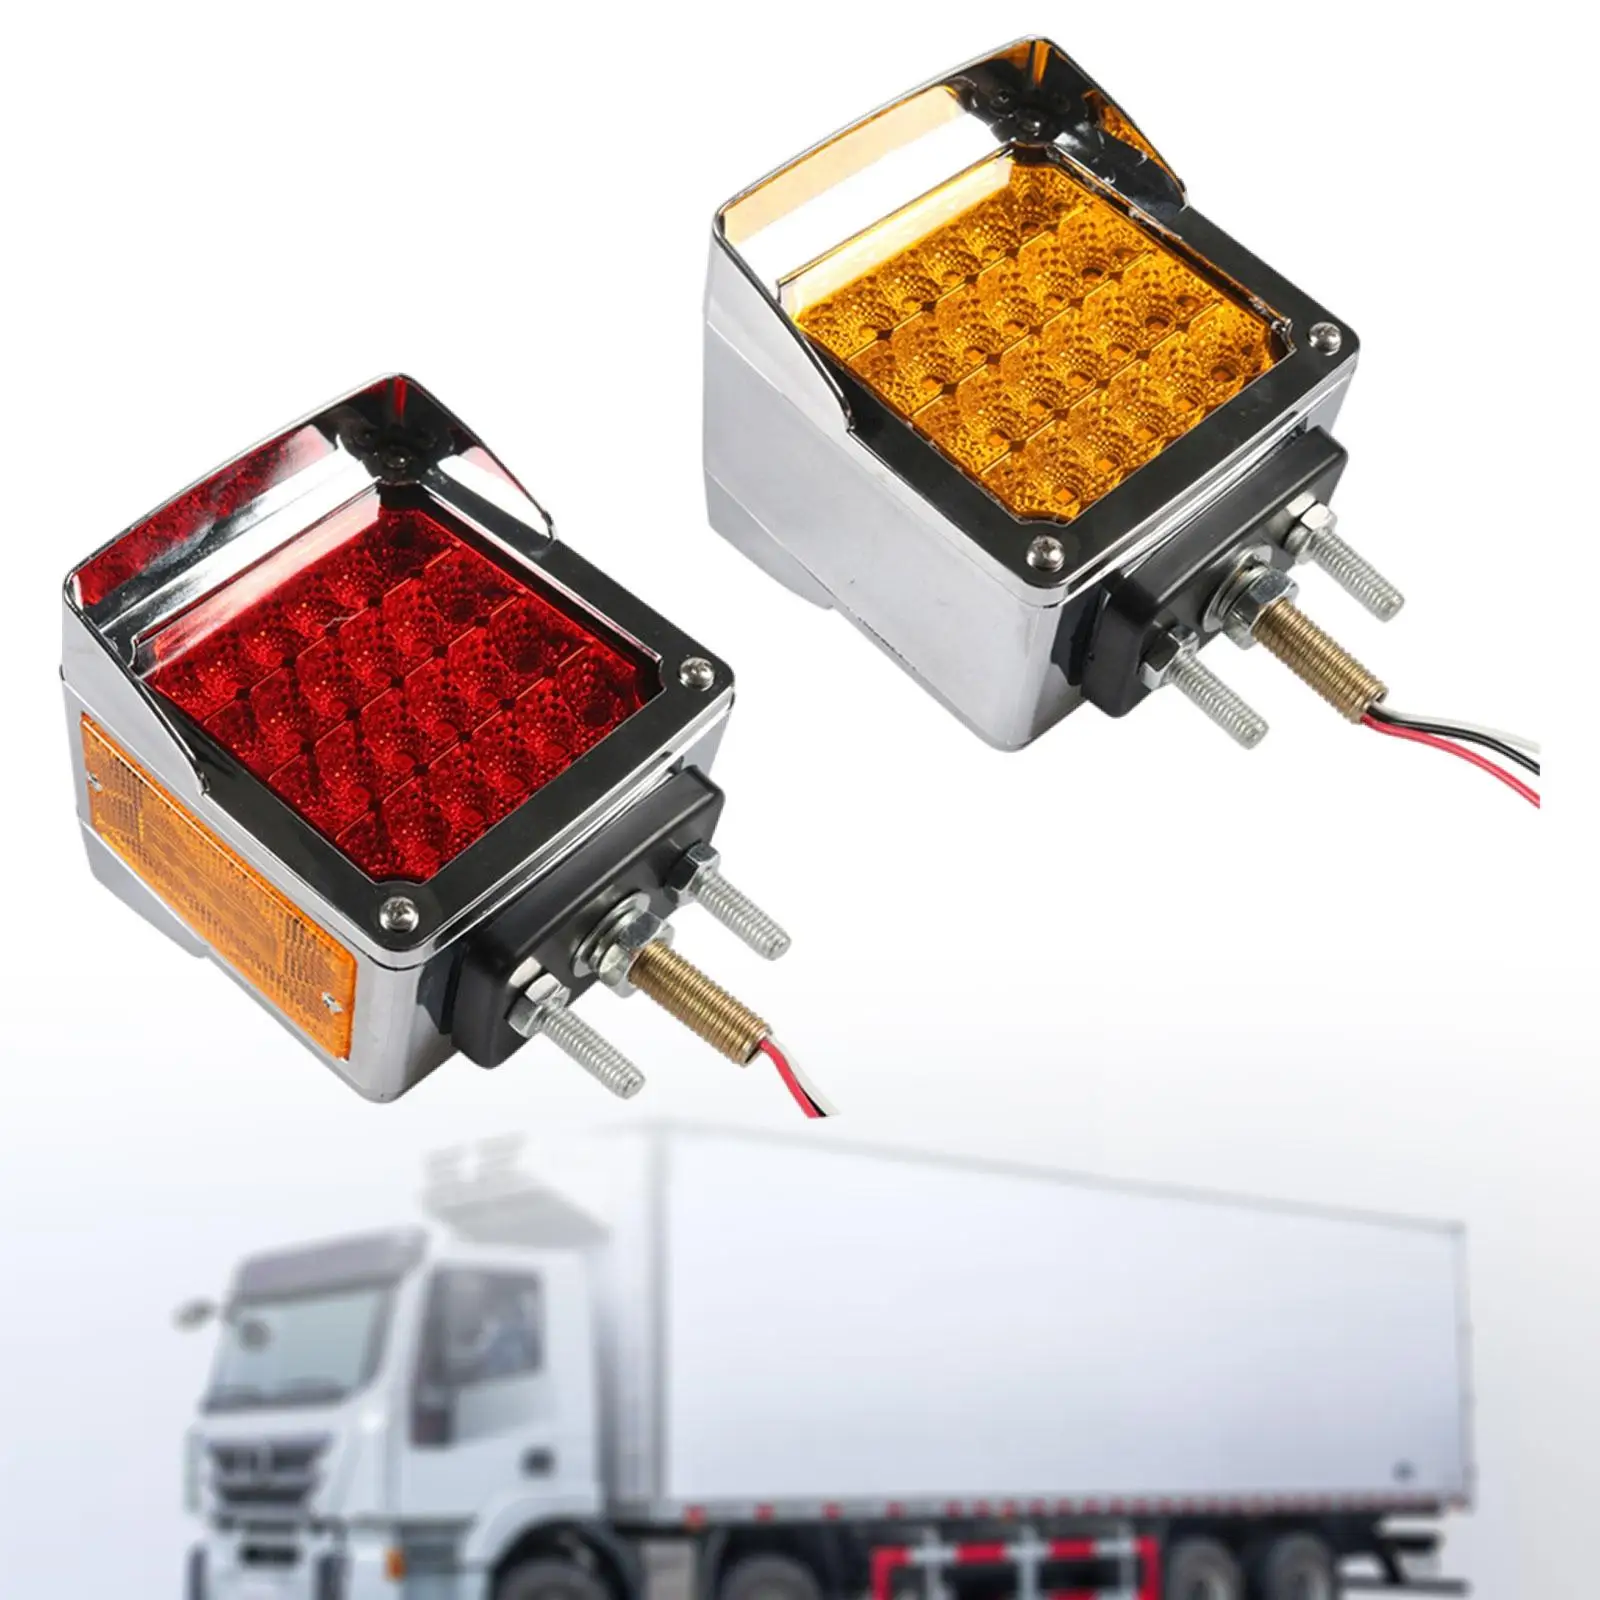 

2x 60 LED Square Pedestal Lights Square Design Automotive Accessory Easy to Install Side Marker Lights for Truck Trailer